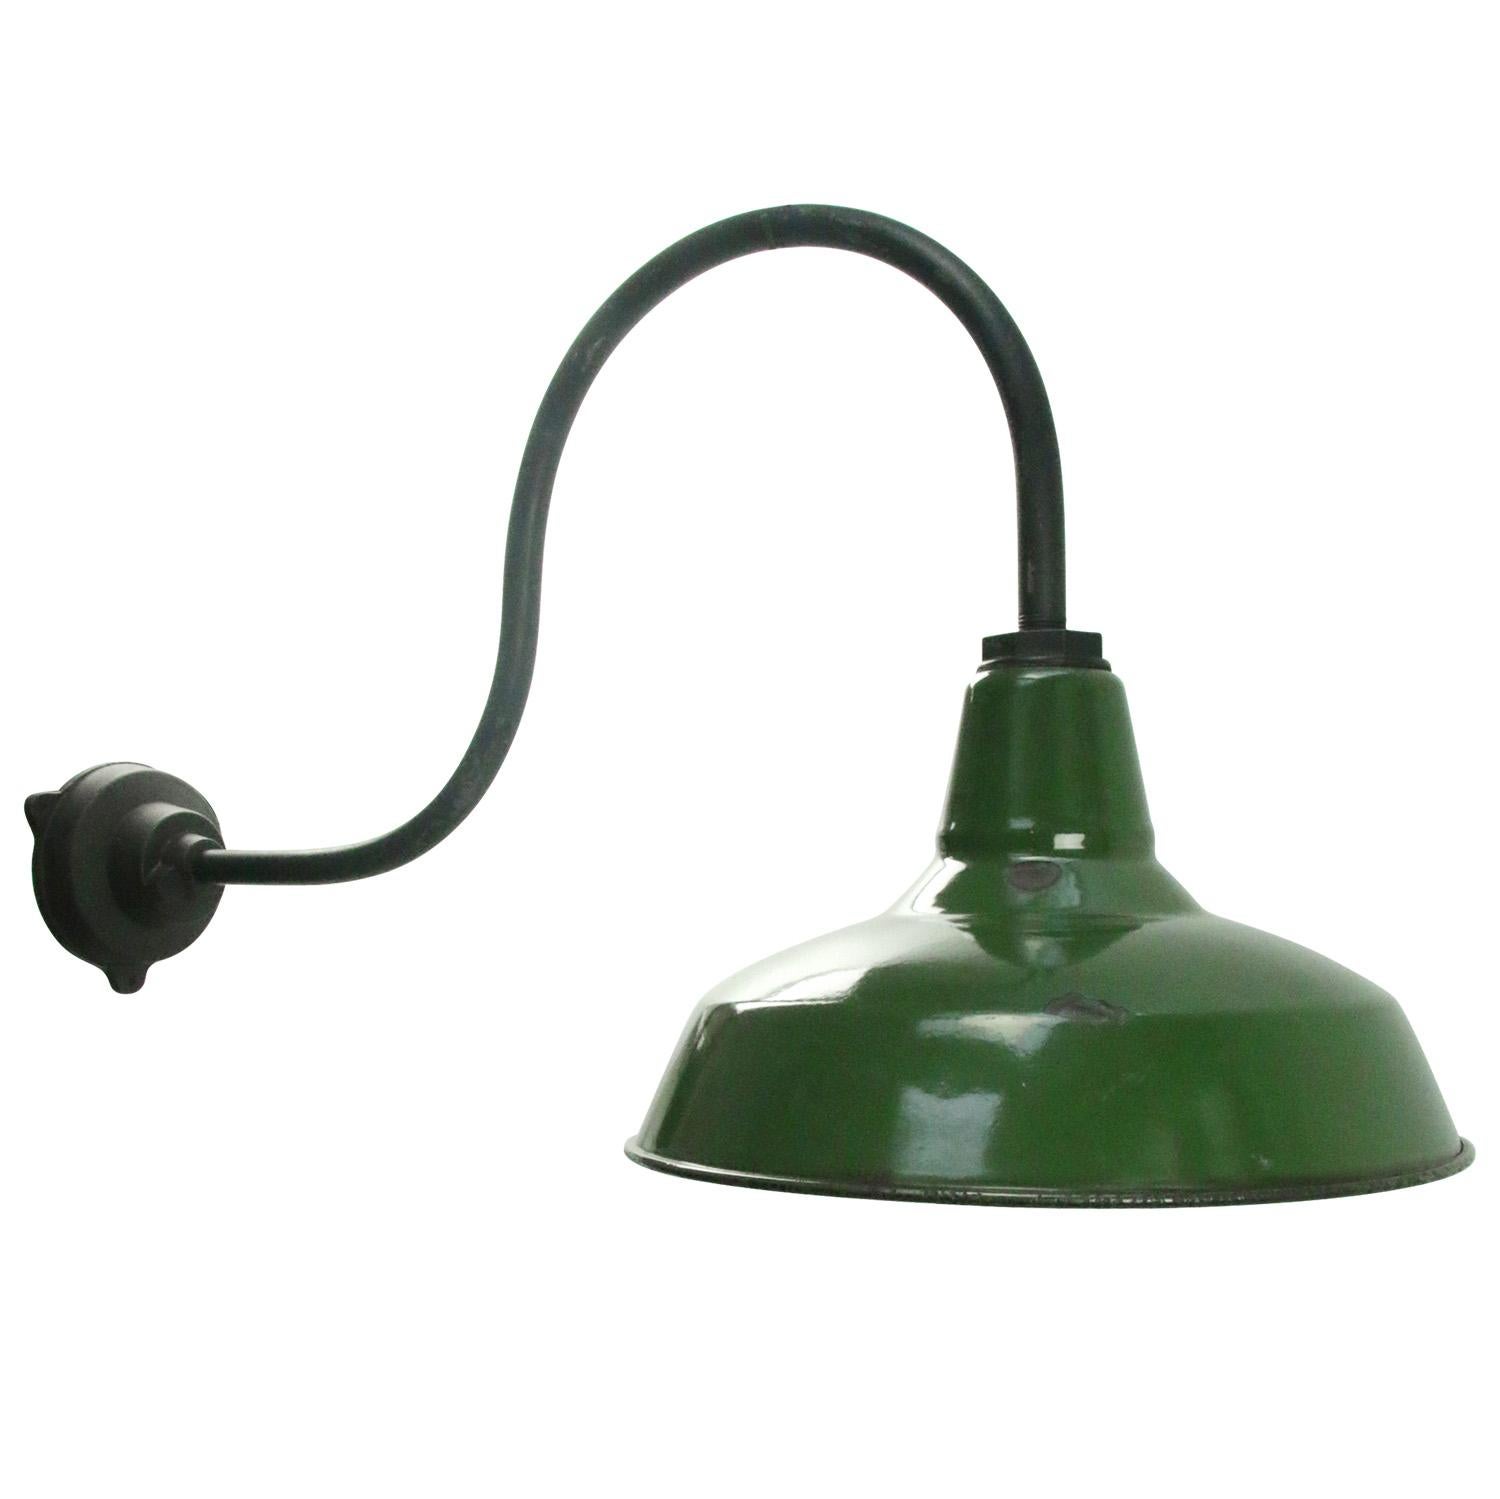 American factory wall light by Benjamin USA
Green enamel, white interior

Measures: Diameter cast iron wall piece: 12 cm, 3 holes to secure

Shipped in 2 parts

Weight: 4.00 kg / 8.8 lb

Priced per individual item. All lamps have been made